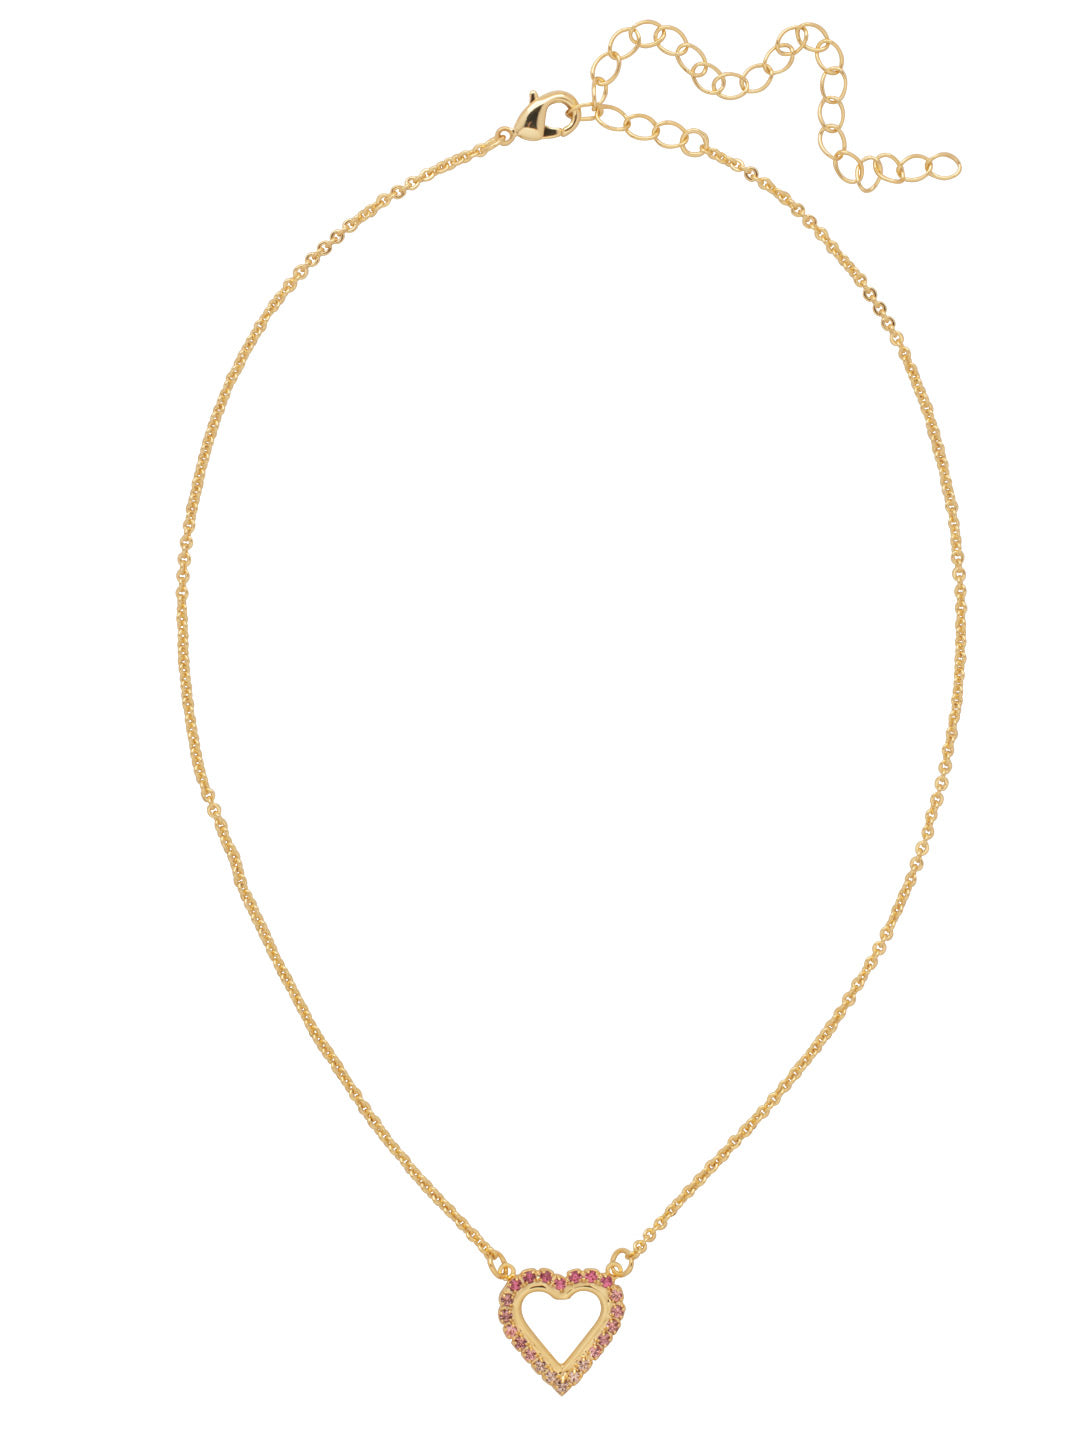 Open Heart Pendant Necklace - NFN10BGBFL - <p>The Open Heart Pendant Necklace features a single crystal lined open heart pendant on an adjustable chain, secured with a lobster claw clasp. From Sorrelli's Big Flirt collection in our Bright Gold-tone finish.</p>